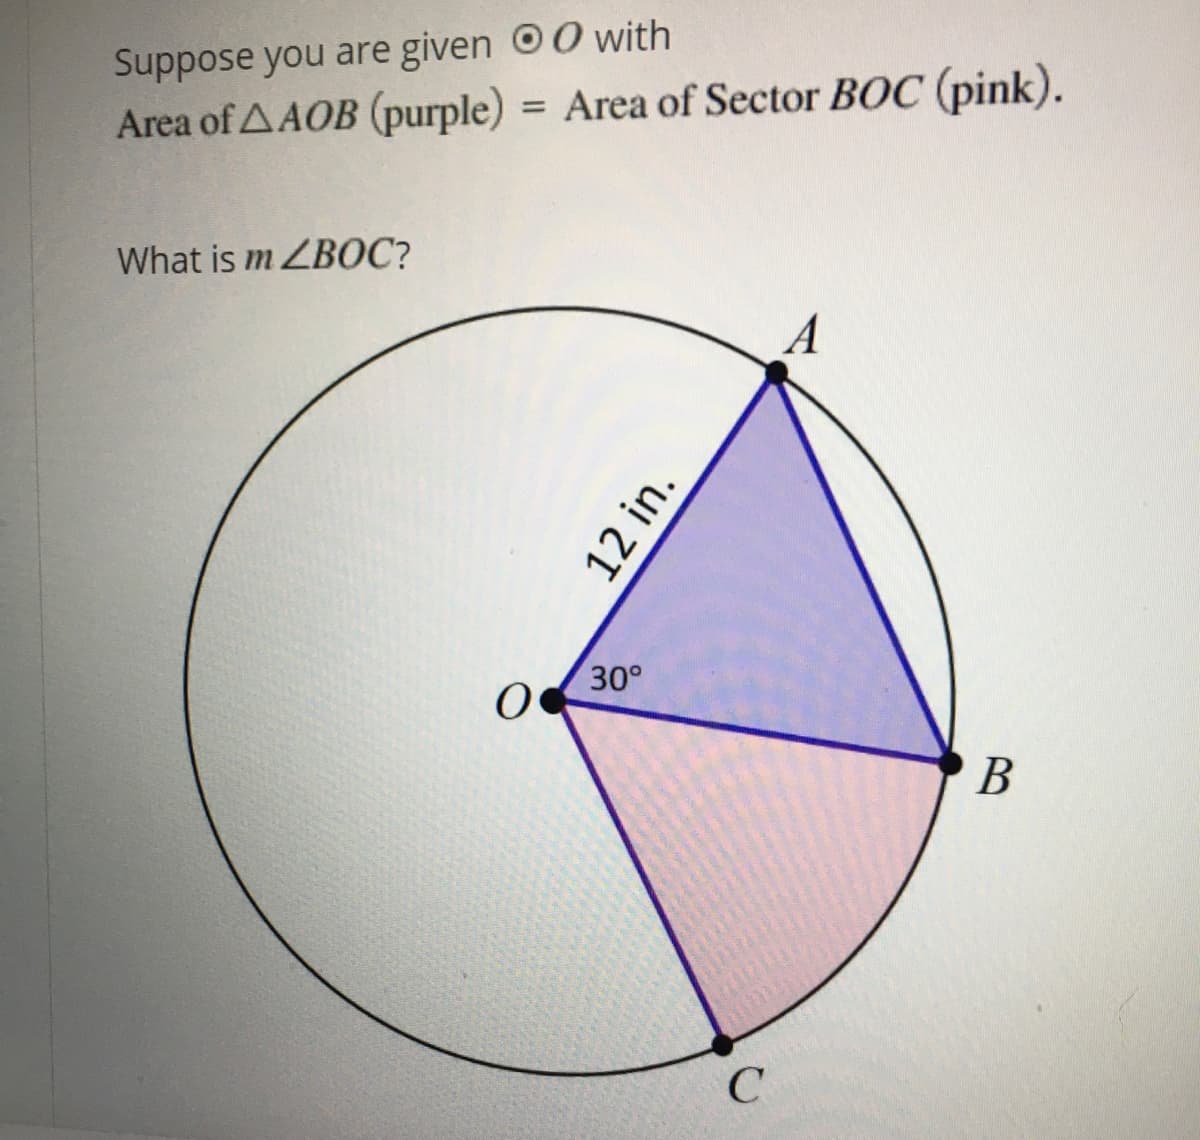 Suppose you are given O0 with
Area of AAOB (purple) = Area of Sector BOC (pink).
%3D
What is m ZBOC?
A
30°
В
12 in.
